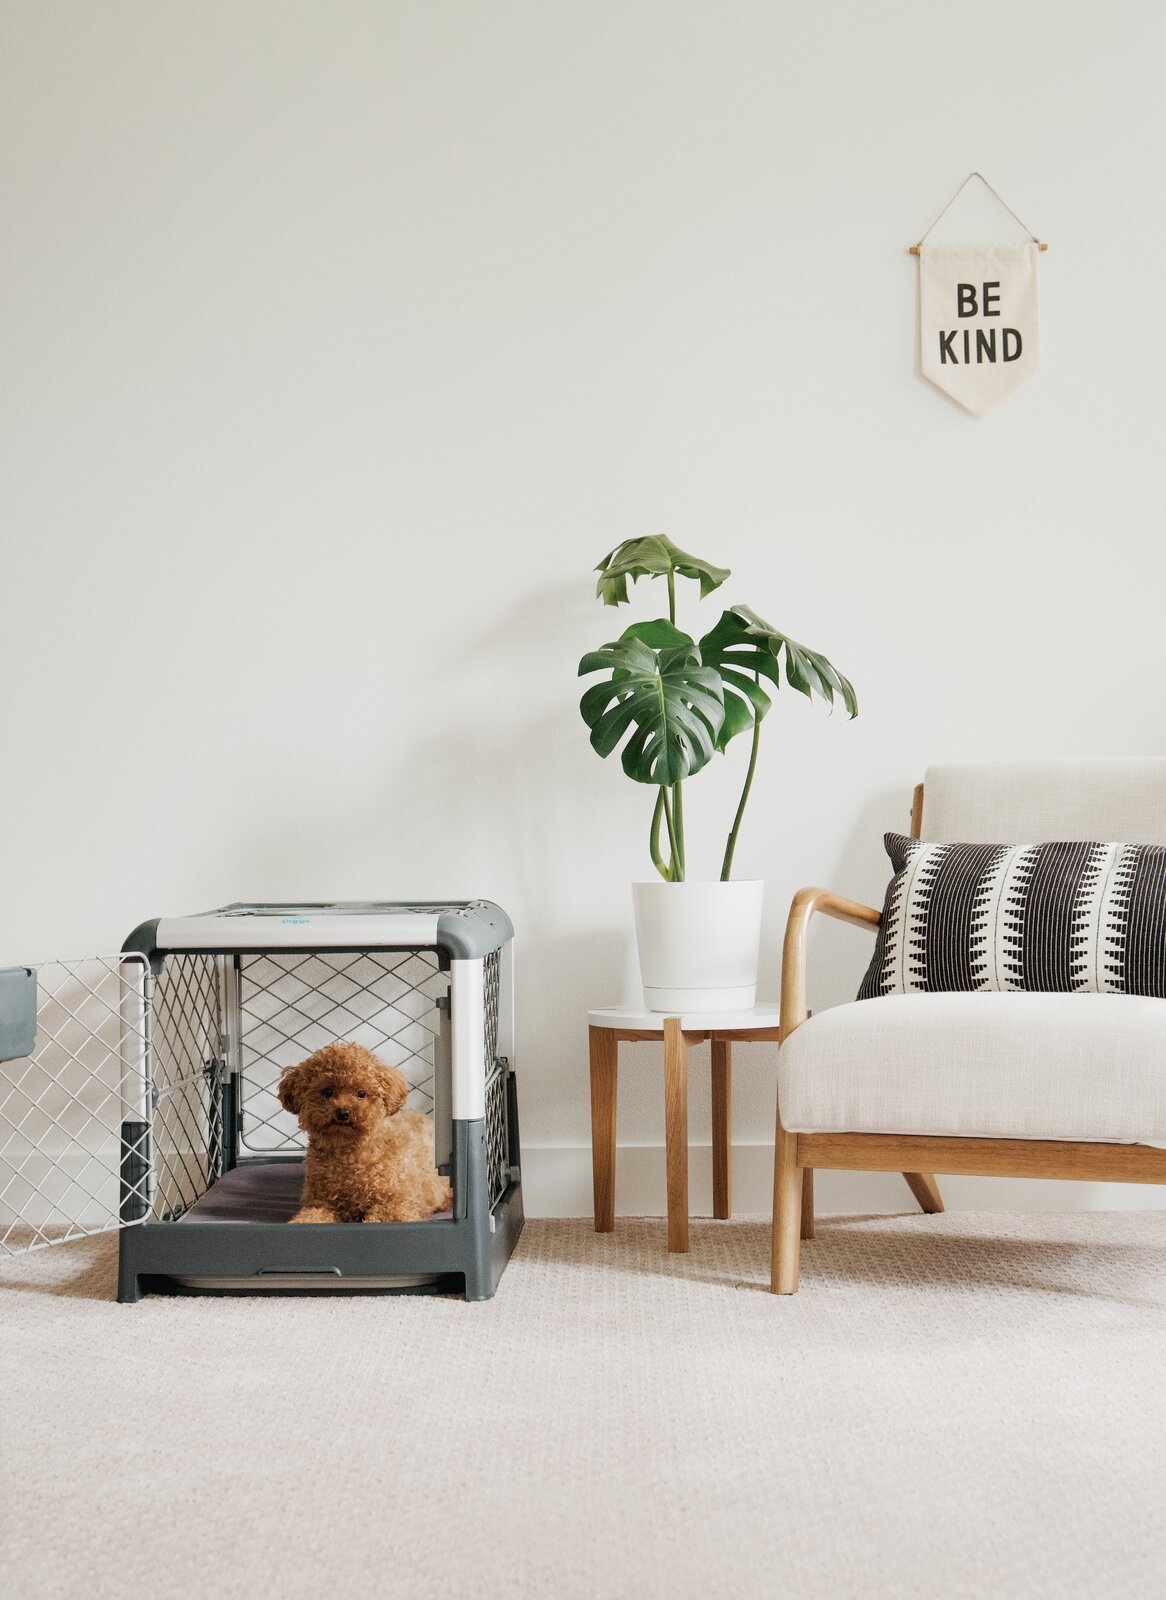 Diggs' Dog Crate Gives Your Furry Friend a Home as Well Designed as Your Own